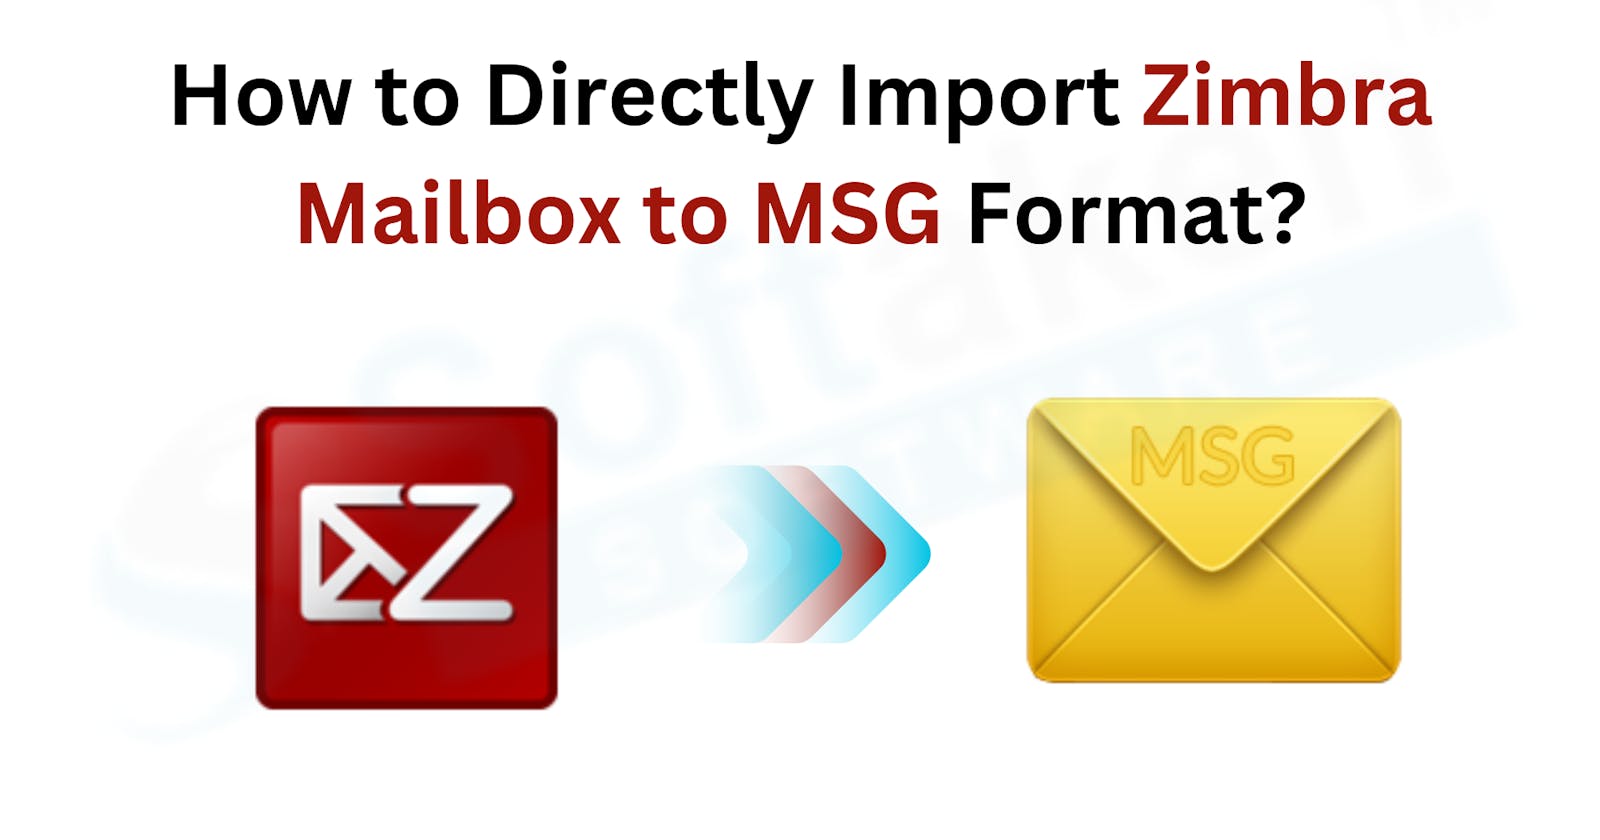 How to Directly Import Zimbra Mailbox to MSG Format?